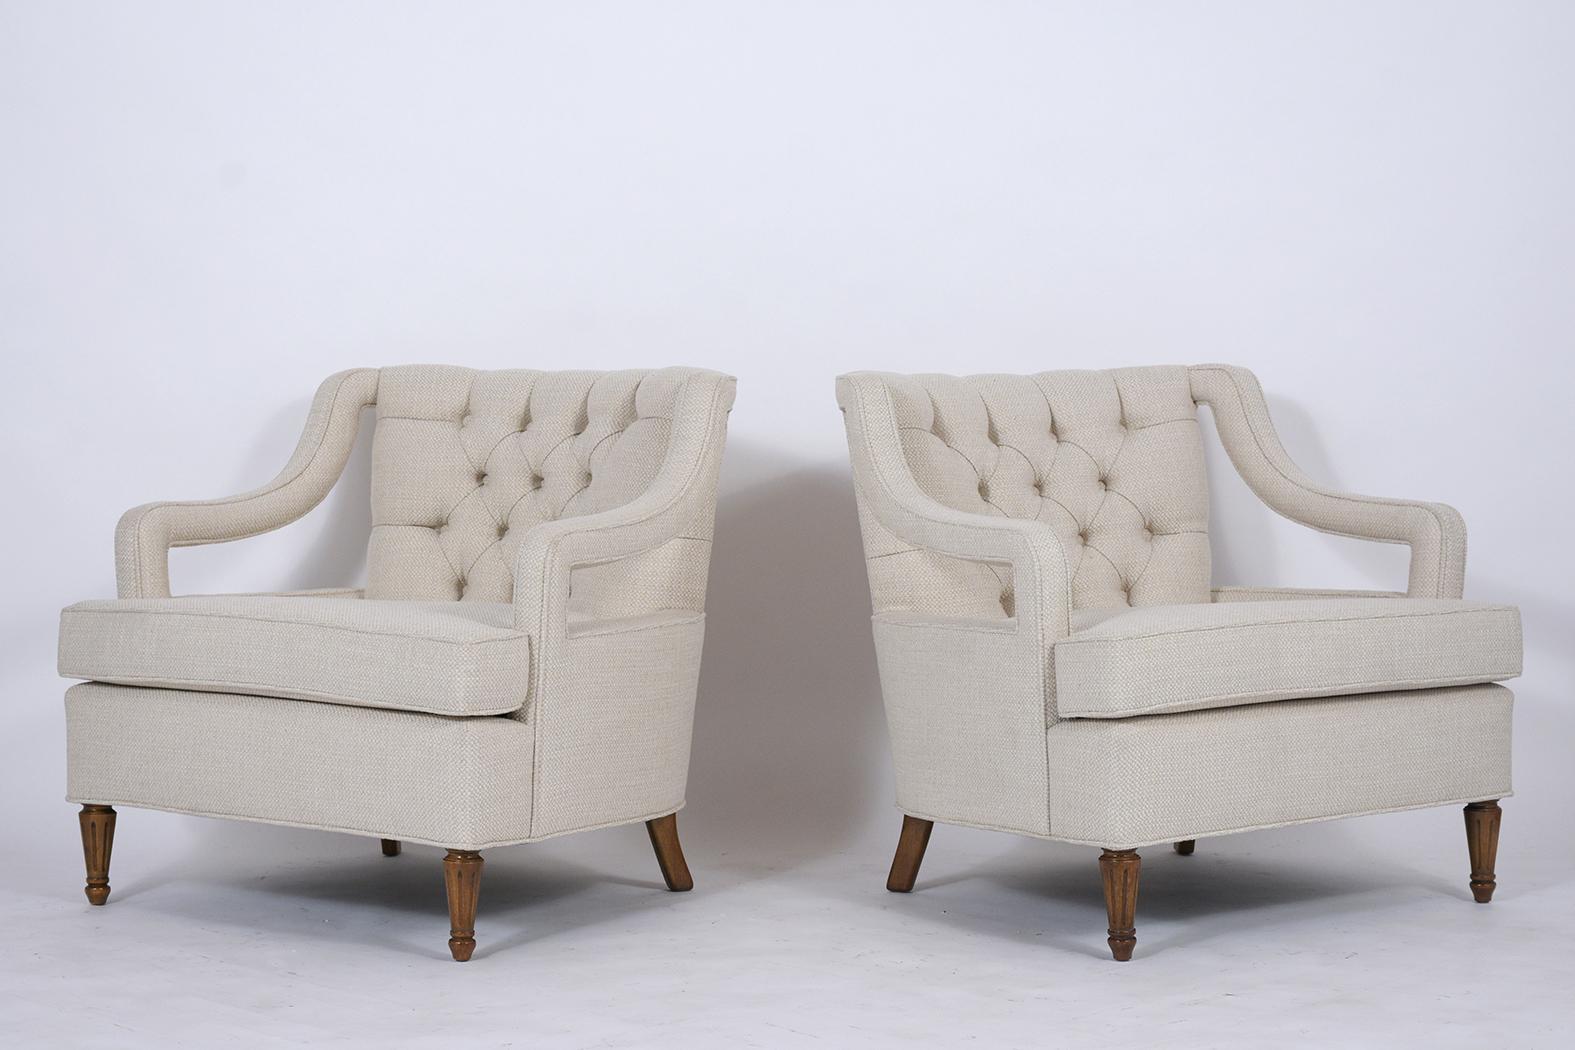 Carved Pair of Mid-Century Modern Lounge Chairs